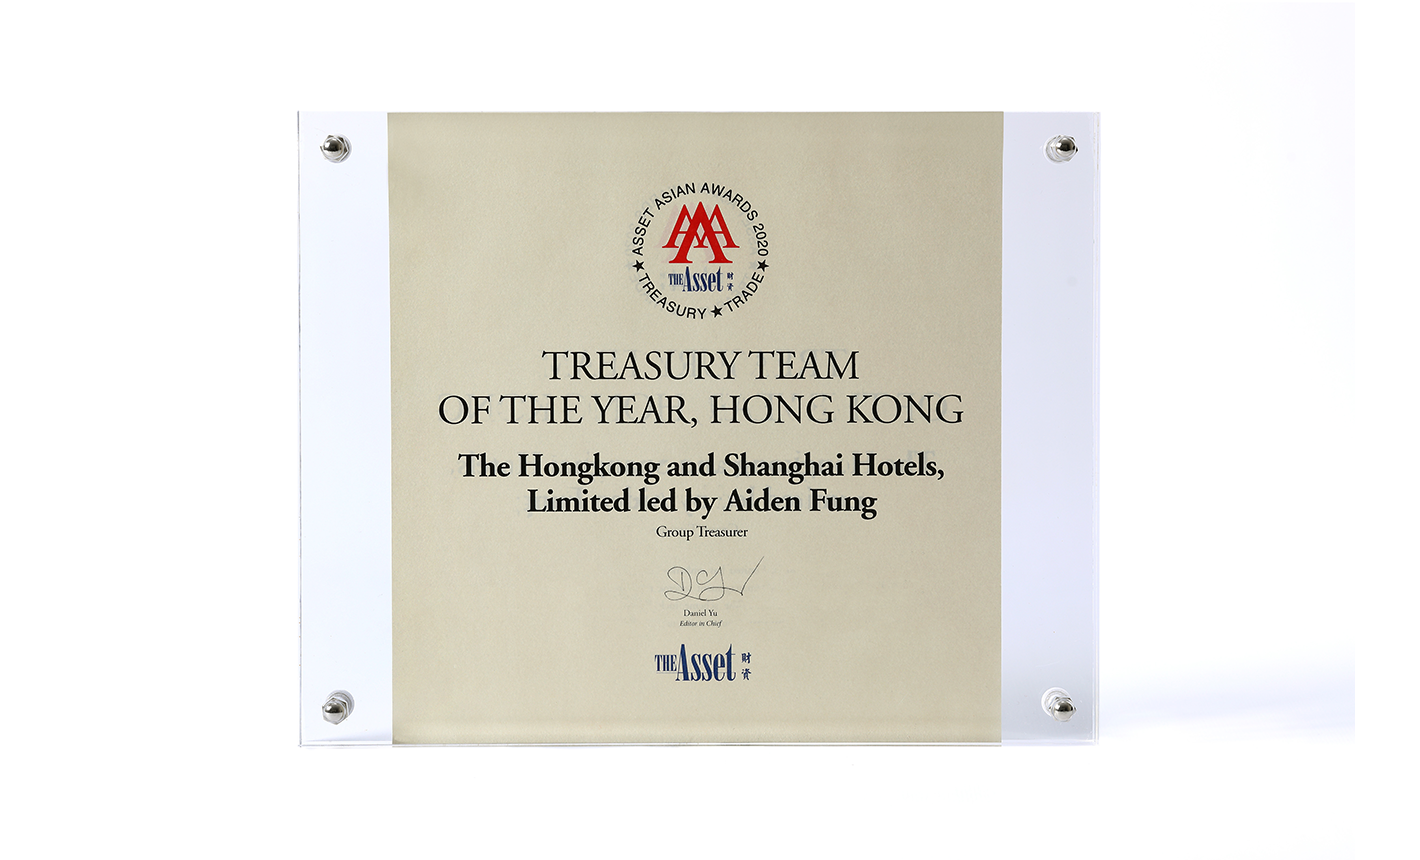 2020 The Asset - Treasury Team of The Year HK